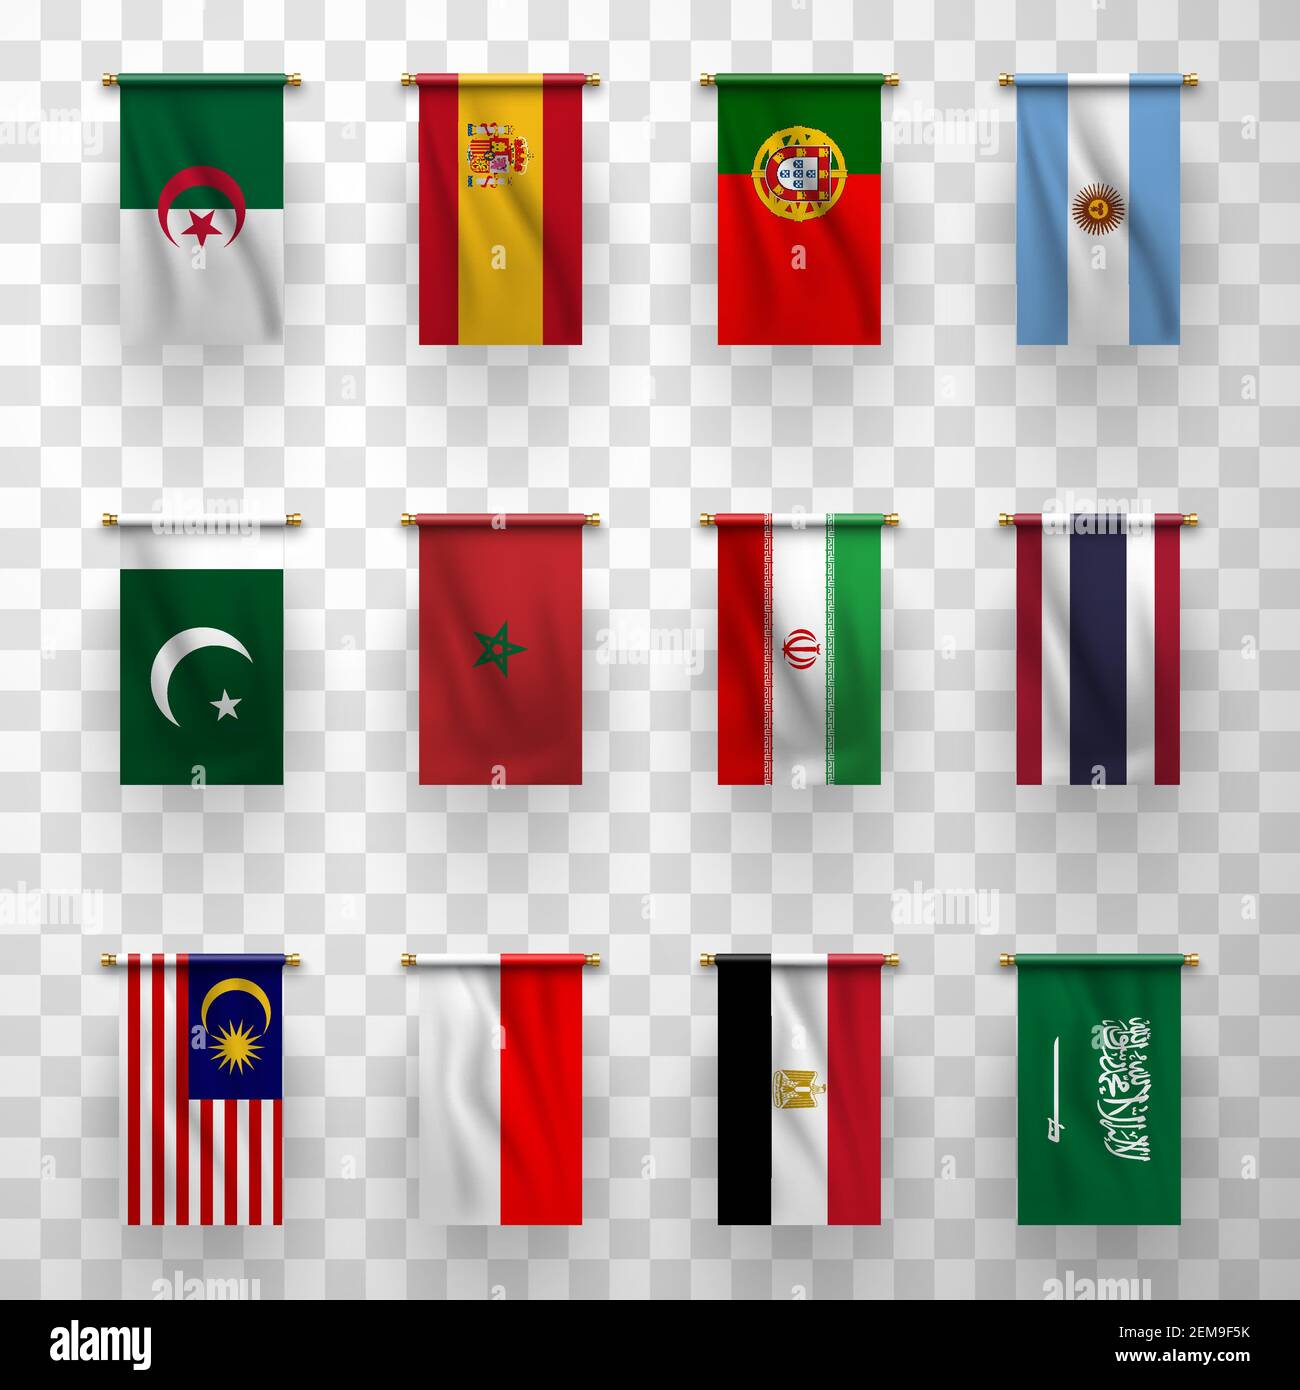 Realistic flags icons Algeria, Morocco and Egypt, Iran, Pakistan, Thailand and Malaysia. Indonesia and Saudi Arabia, Spain, Portugal and Argentina iso Stock Vector